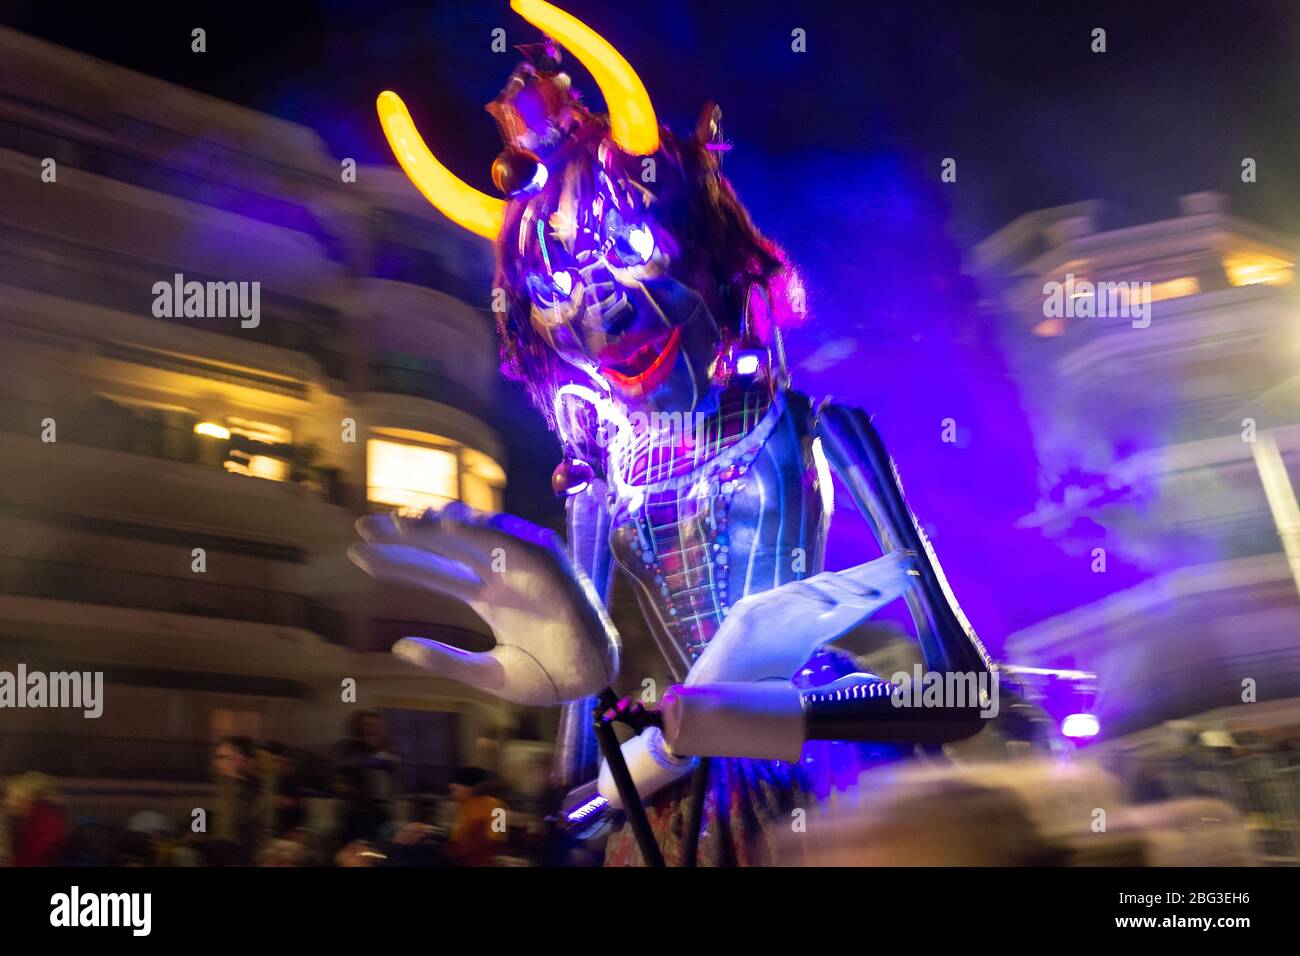 Demon puppet in the night parade of the 87th Fête du Citron (Lemon Festival) in Menton, France. The festival was cancelled due to the outbreak of novel coronavirus disease (COVID-19) Stock Photo